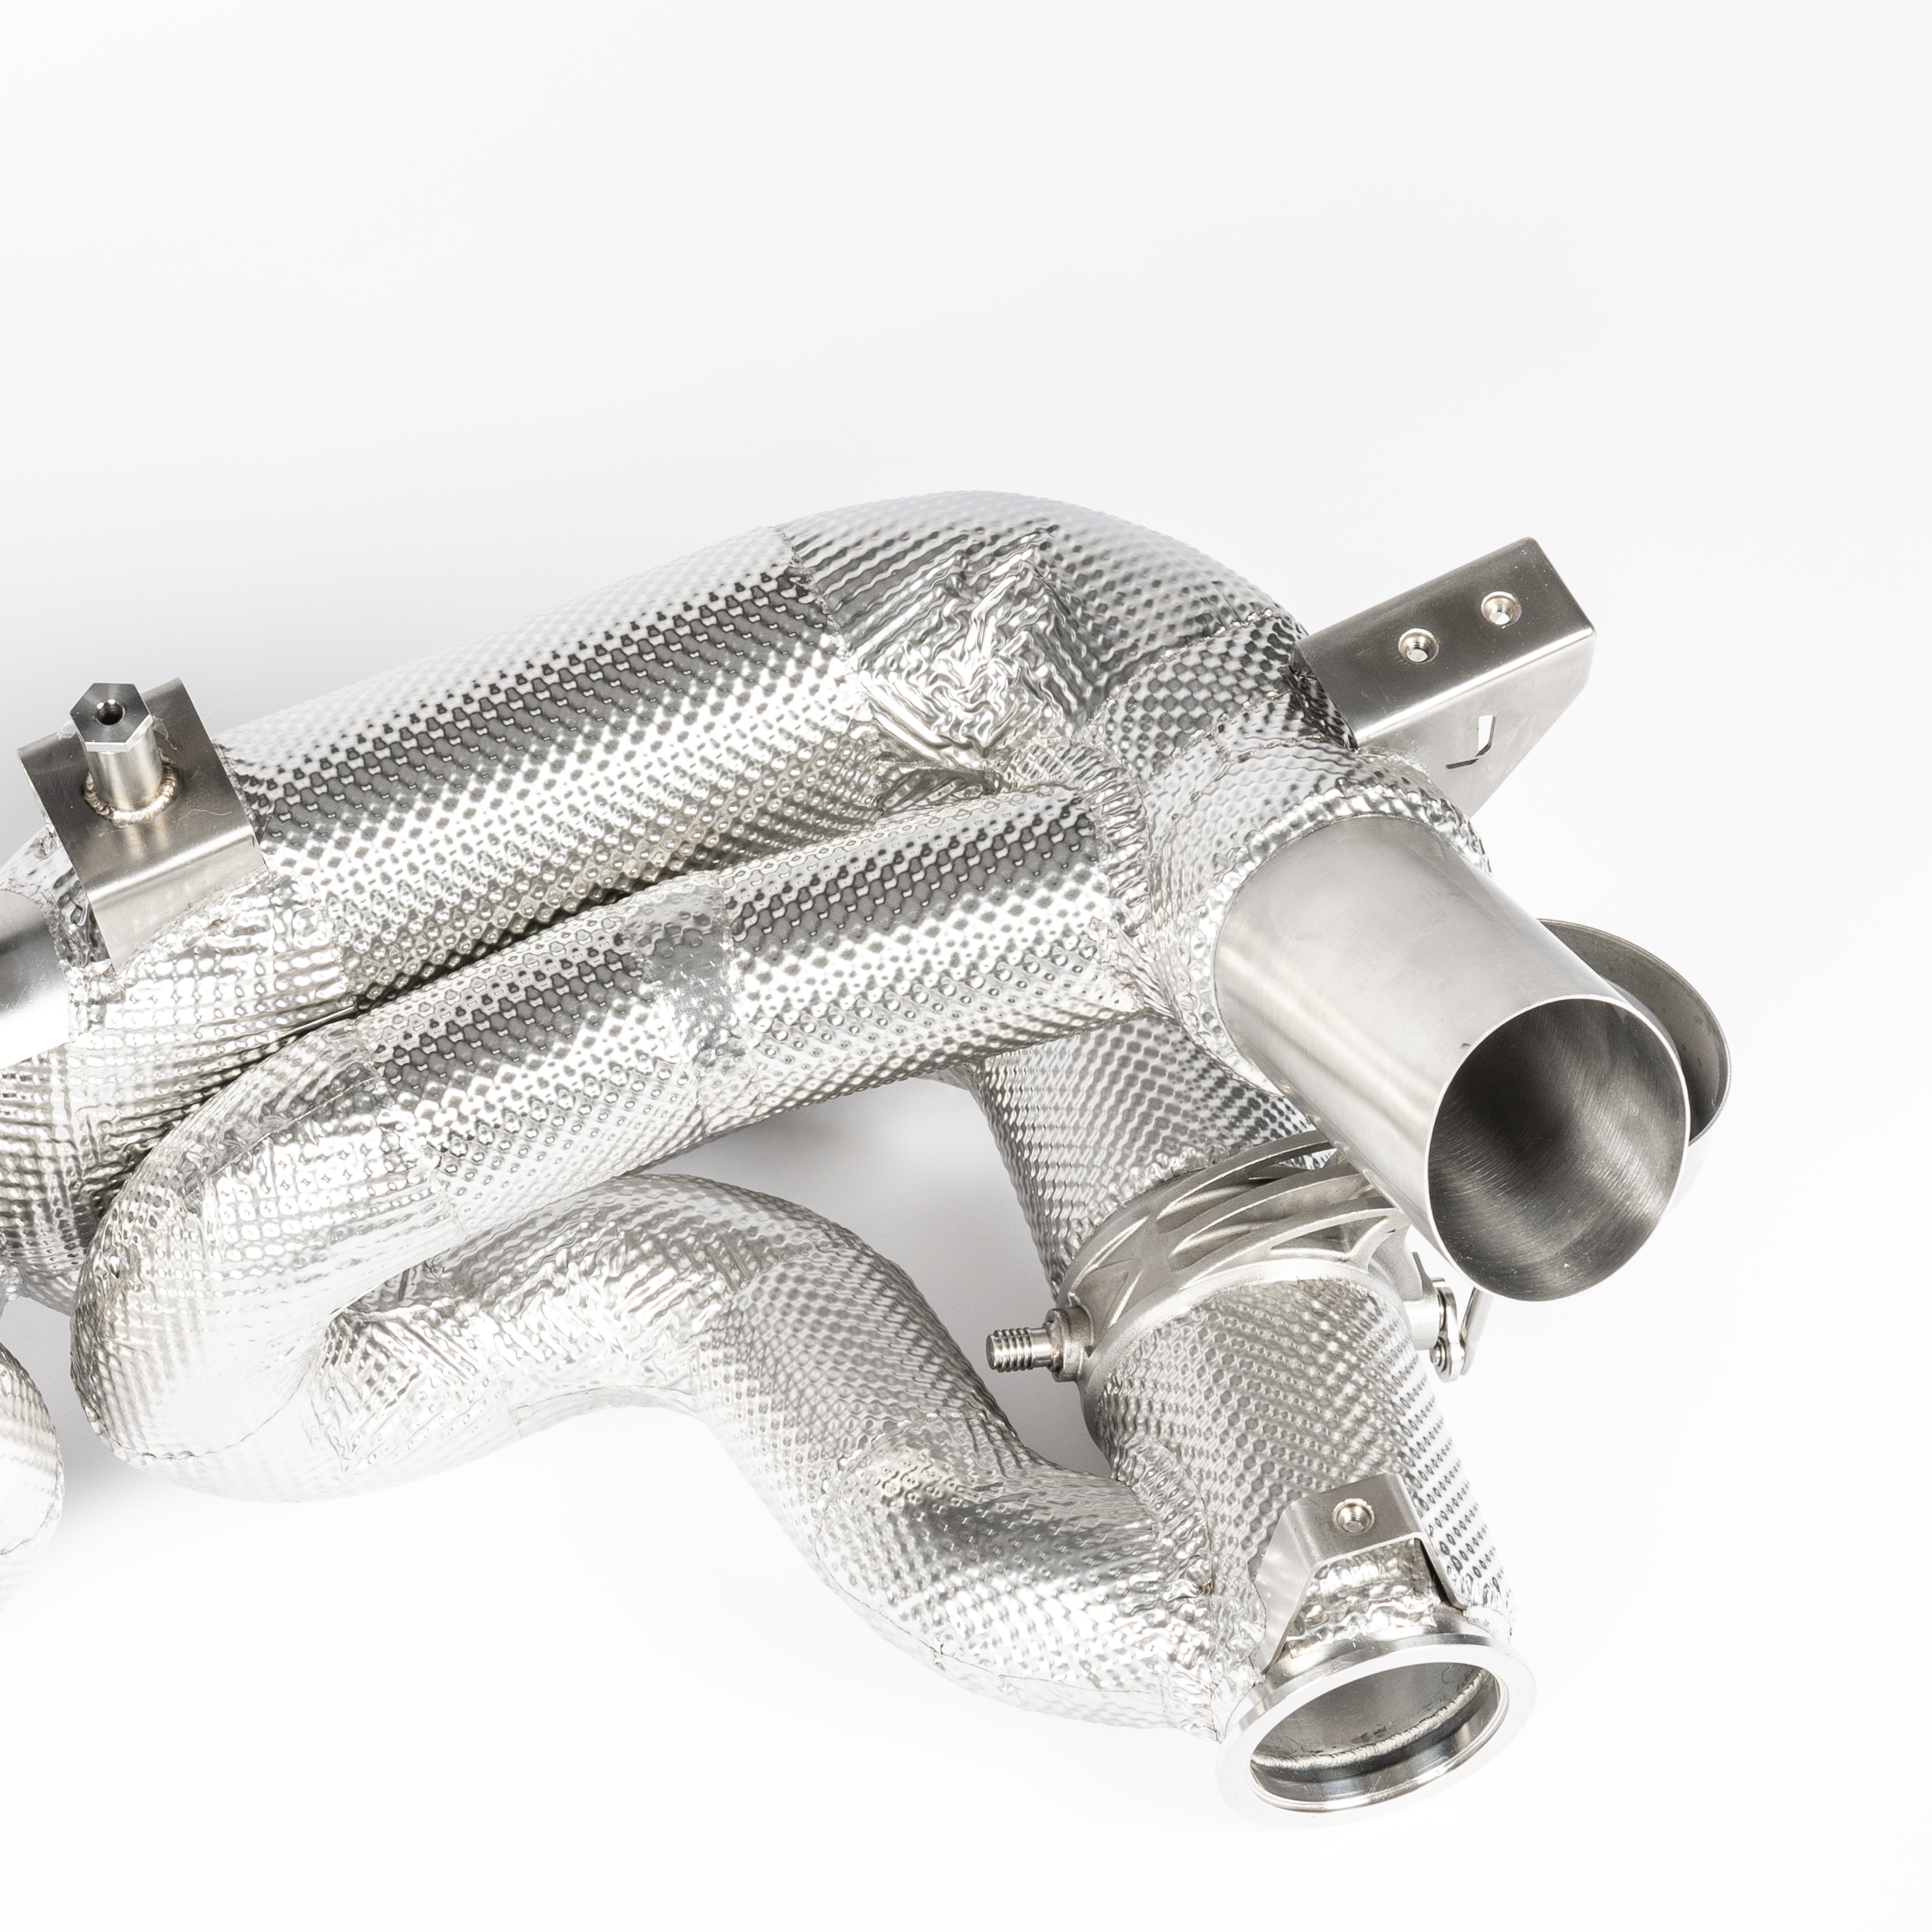 918 SPYDER INCONEL VALVED RACE PIPE & RACE CATS